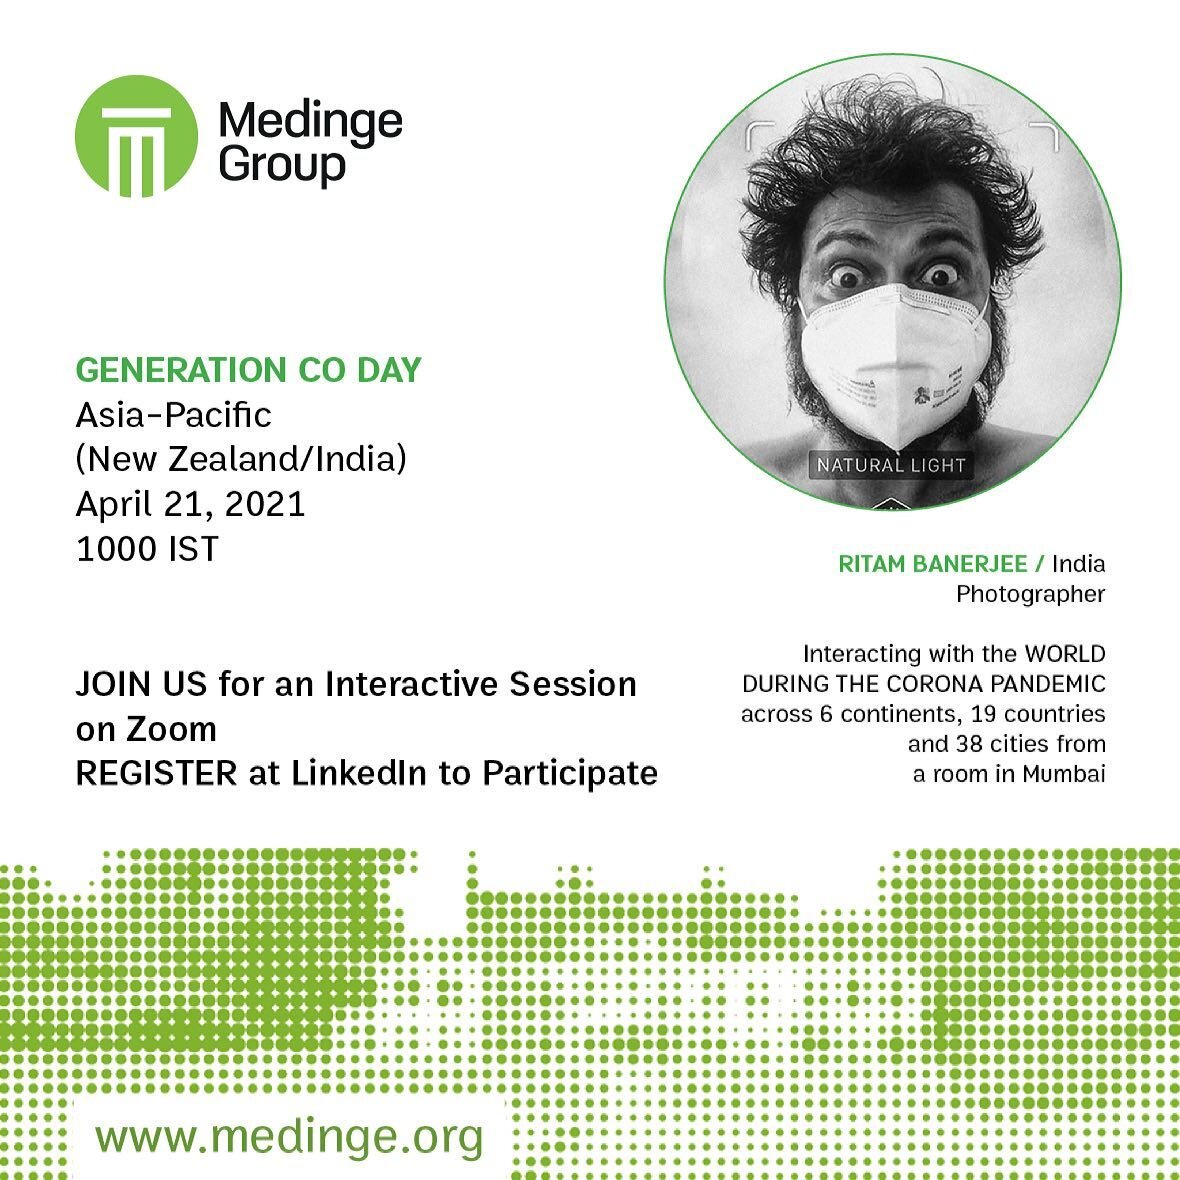 GENERATION CO WAVE, APRIL 21, 2021

Let&rsquo;s have a global wave!

Join us on Gen Co Day at our global wave of dialogues on April 21, 2021 to discuss if we are all Generation Co now.

To participate, register through Linkedin
https://lnkd.in/gffuCe